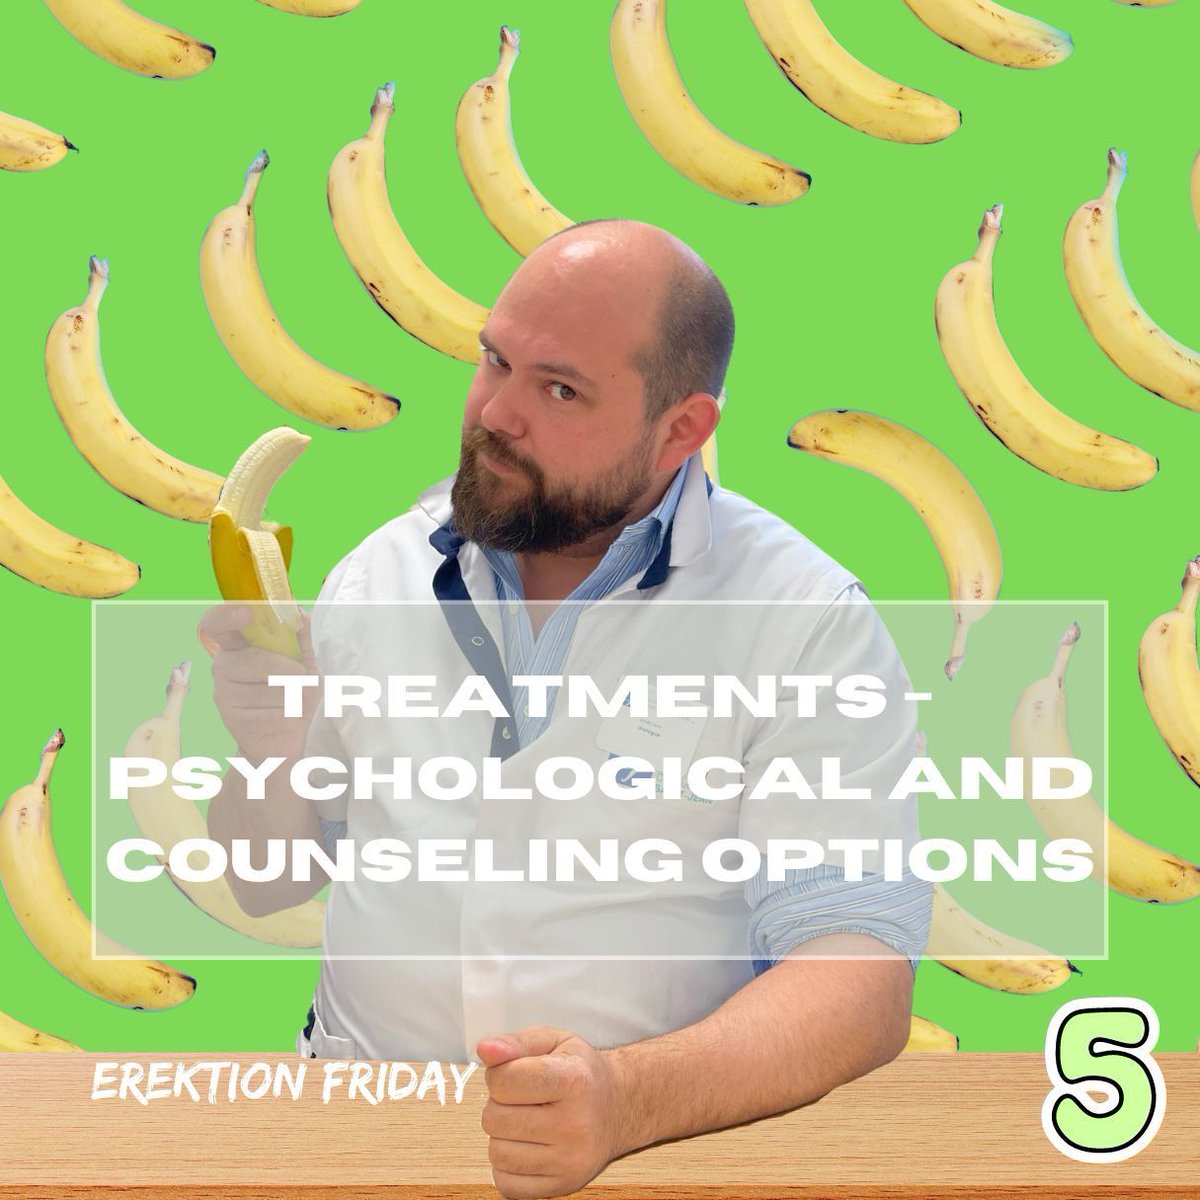 Addressing ED involves physical & mental journeys. Psychotherapy targets anxiety or stress, improving mental & sexual health. Relationship therapy aids couples in communicating & restoring intimacy, strengthening bonds. Talk to your GP. buff.ly/3SUaRgG  #ErektionFriday